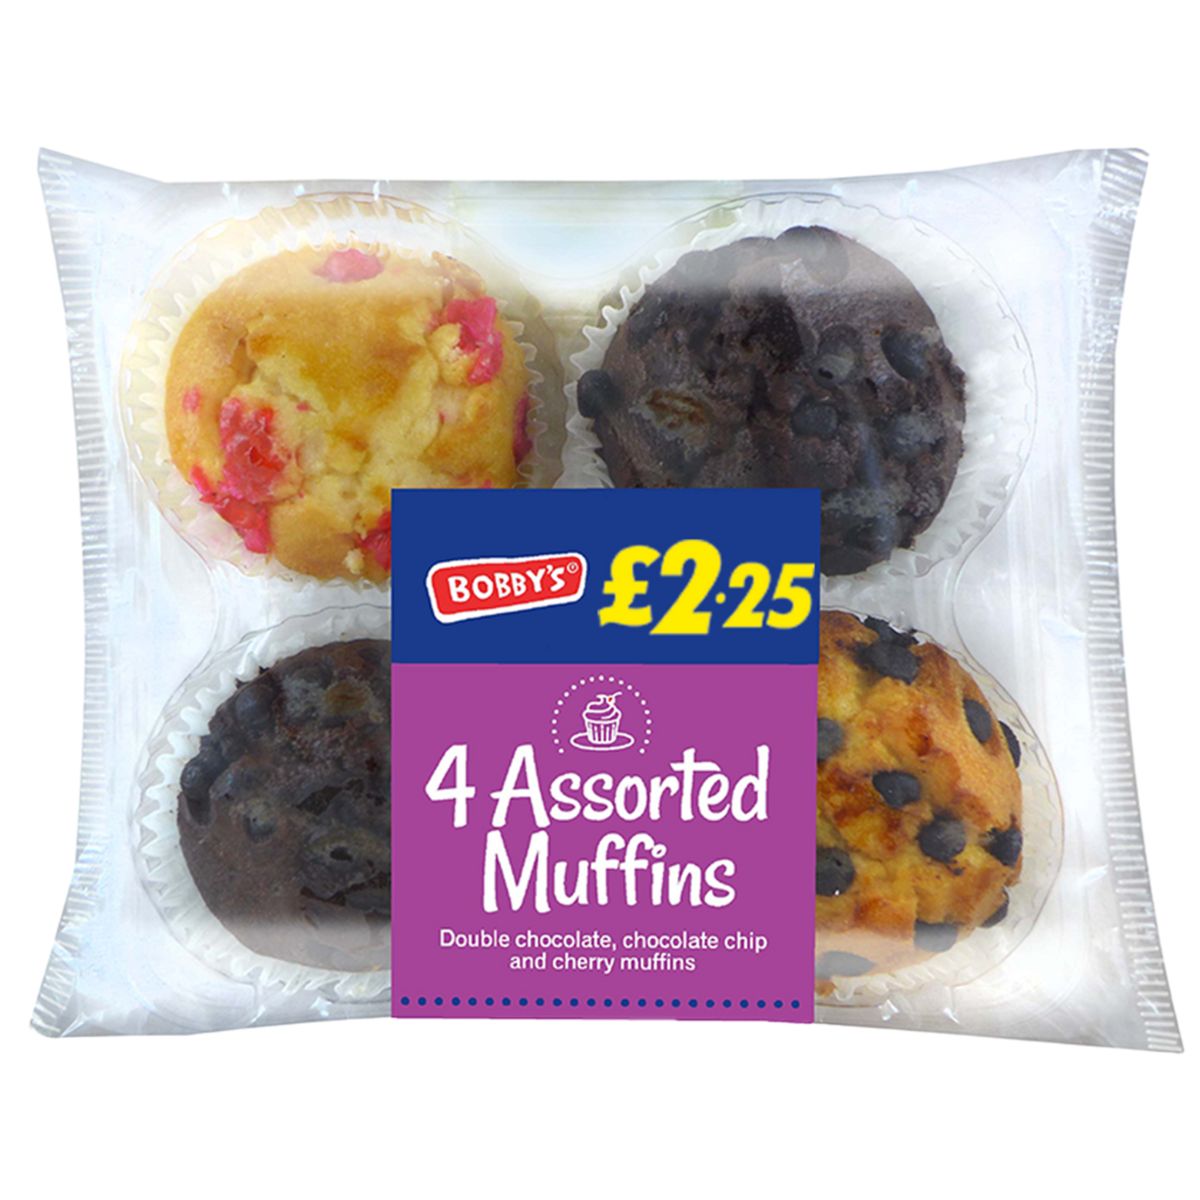 Four Bobbys - 4 Assorted Muffins - 285g in a plastic bag.